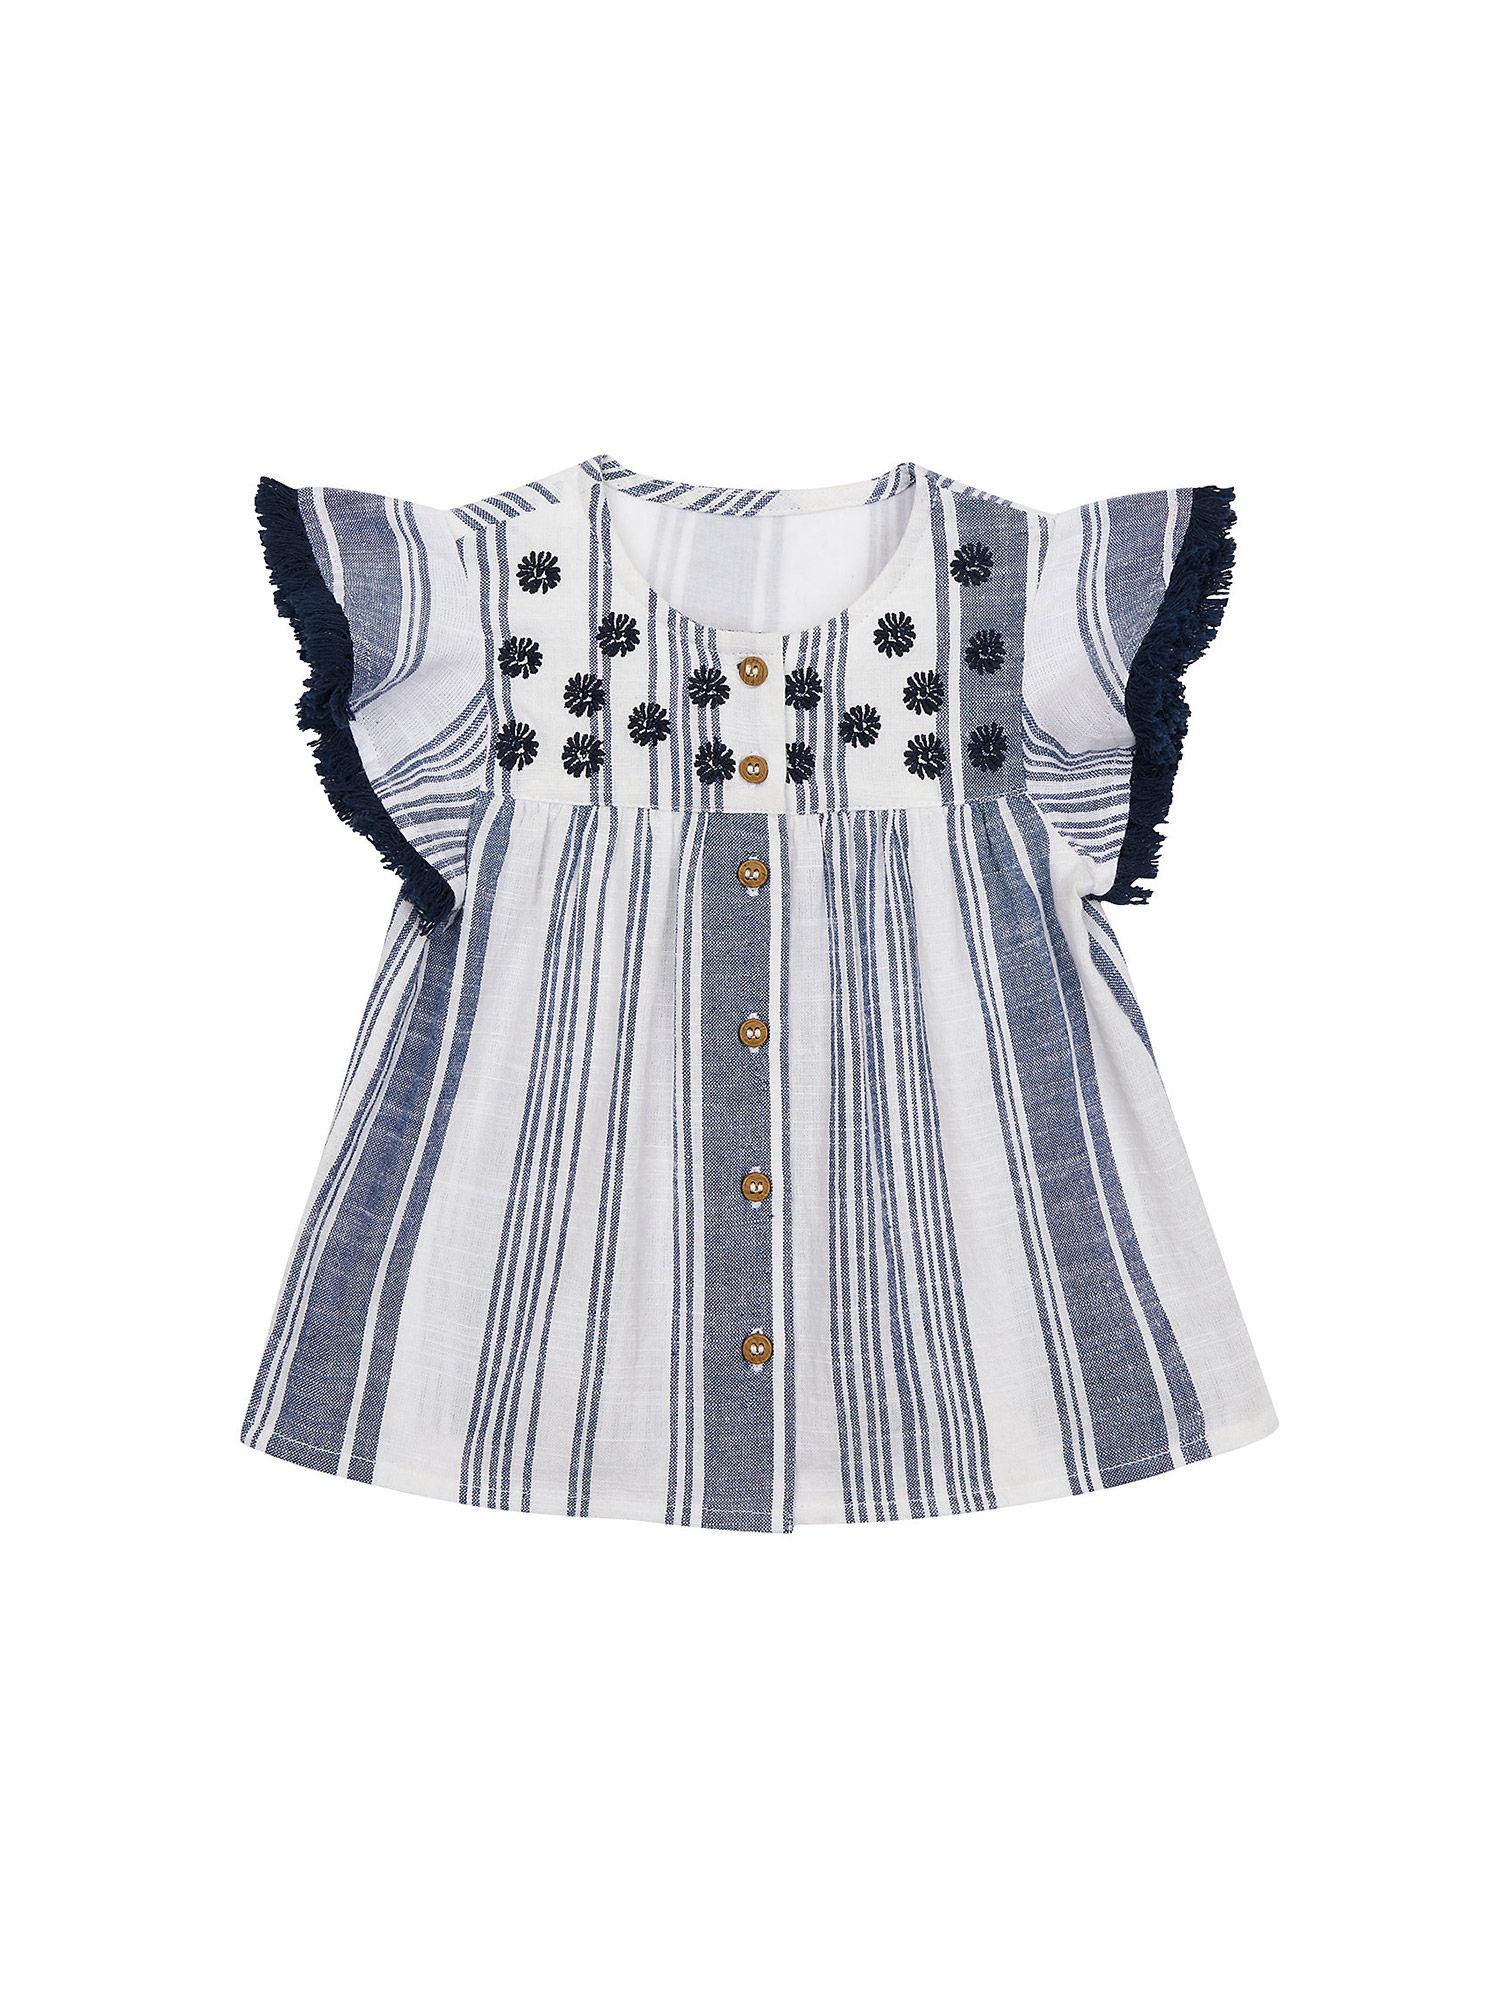 girls half sleeves striped top embroidered